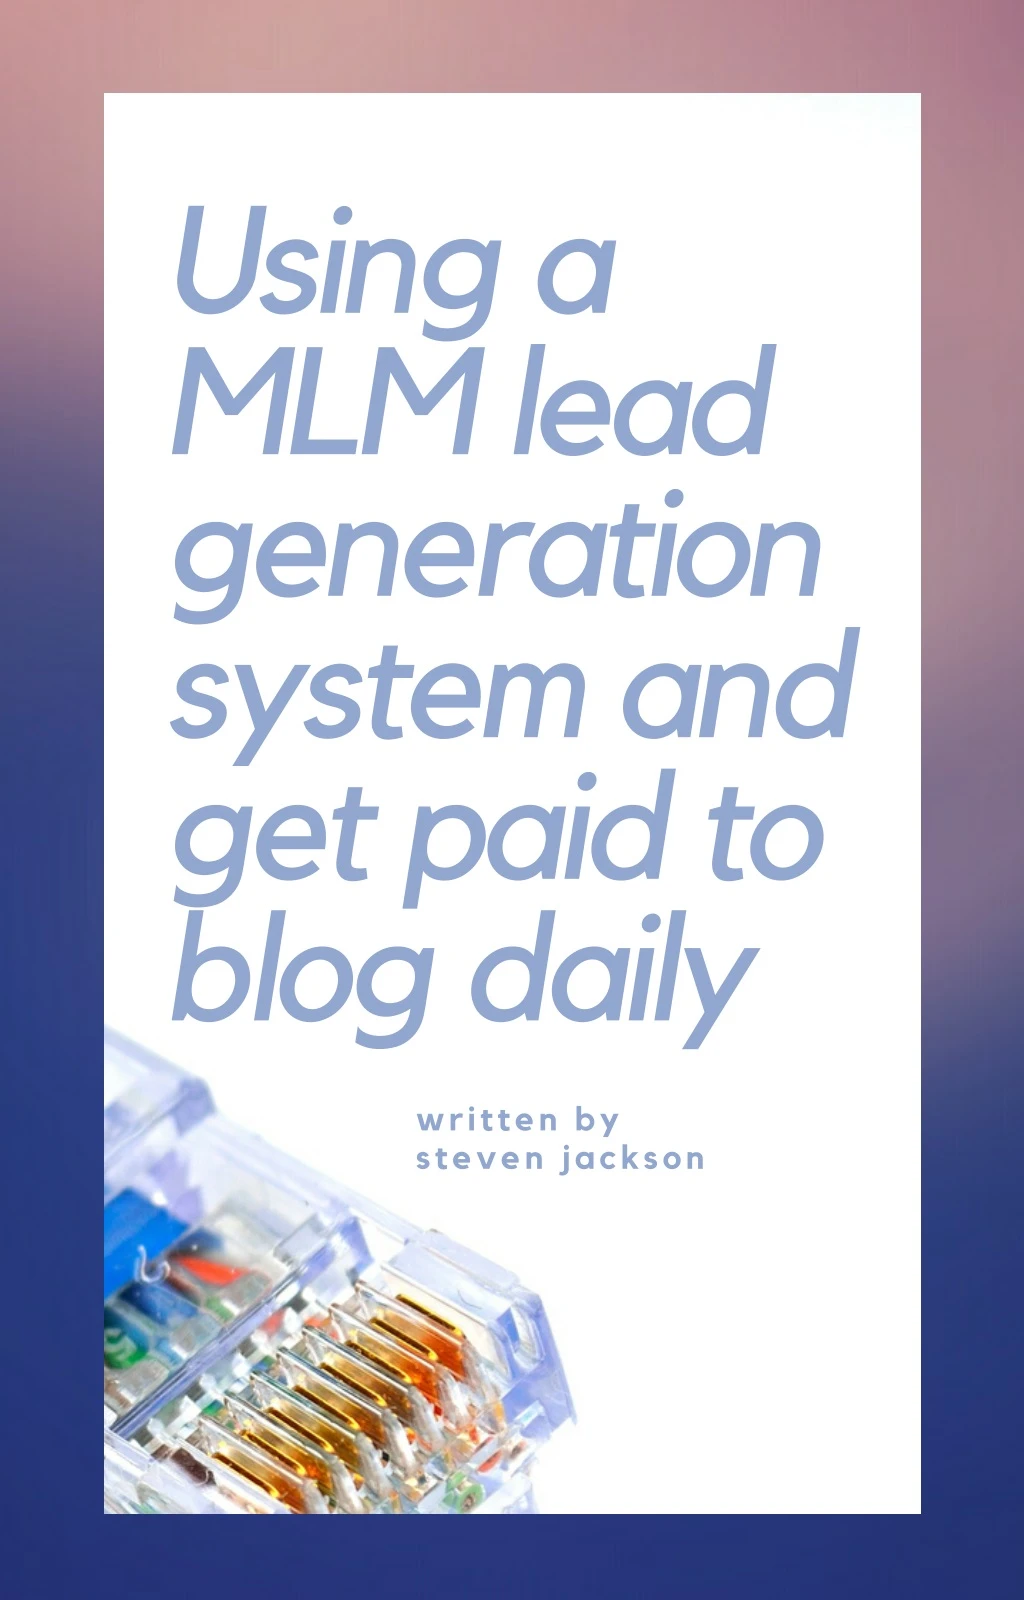 using a mlm lead generation system and get paid